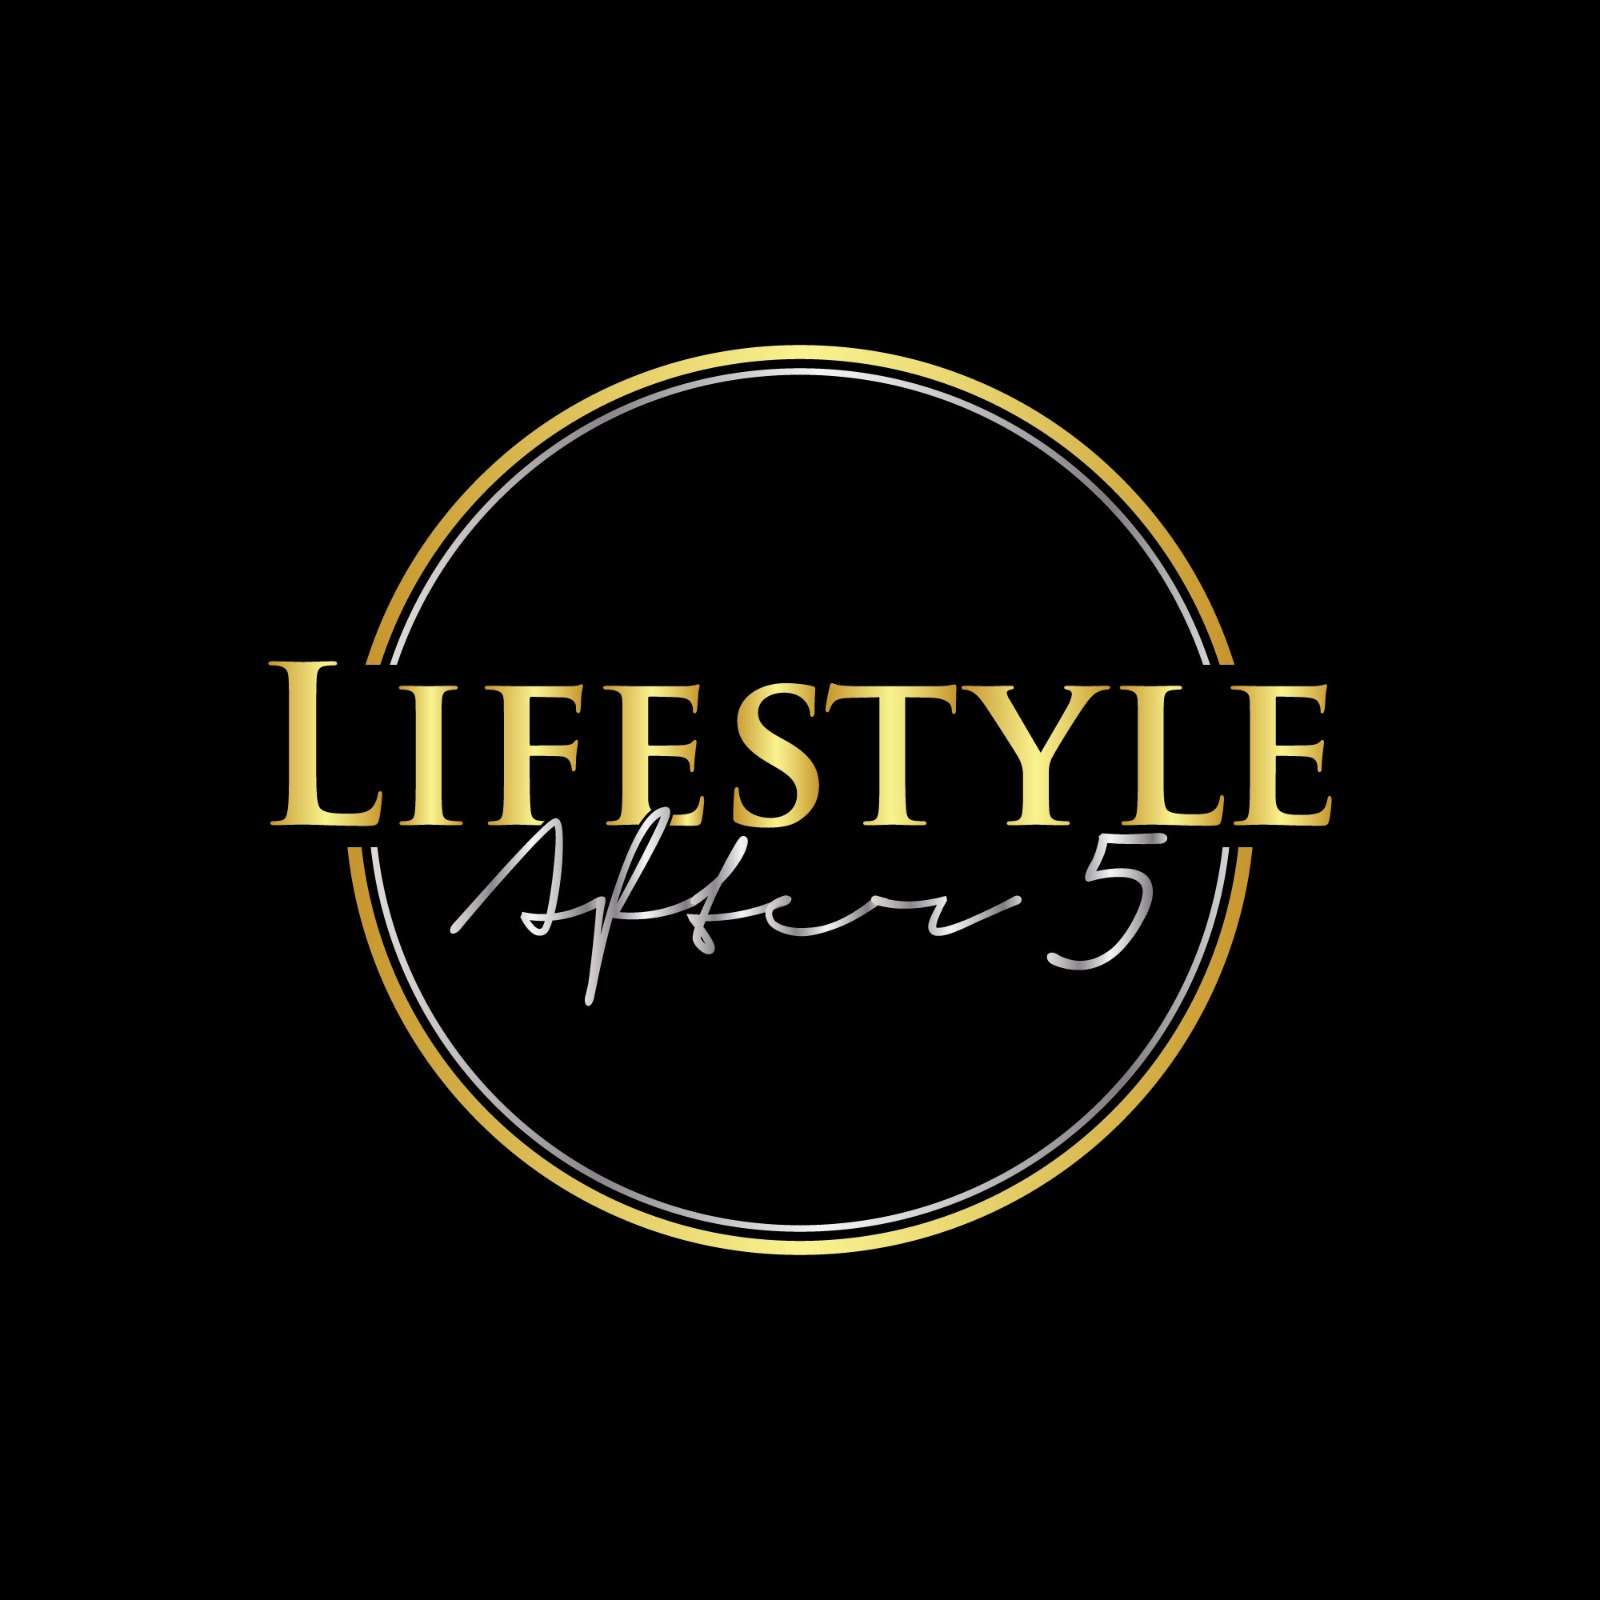 Official Lifestyle After5 logo